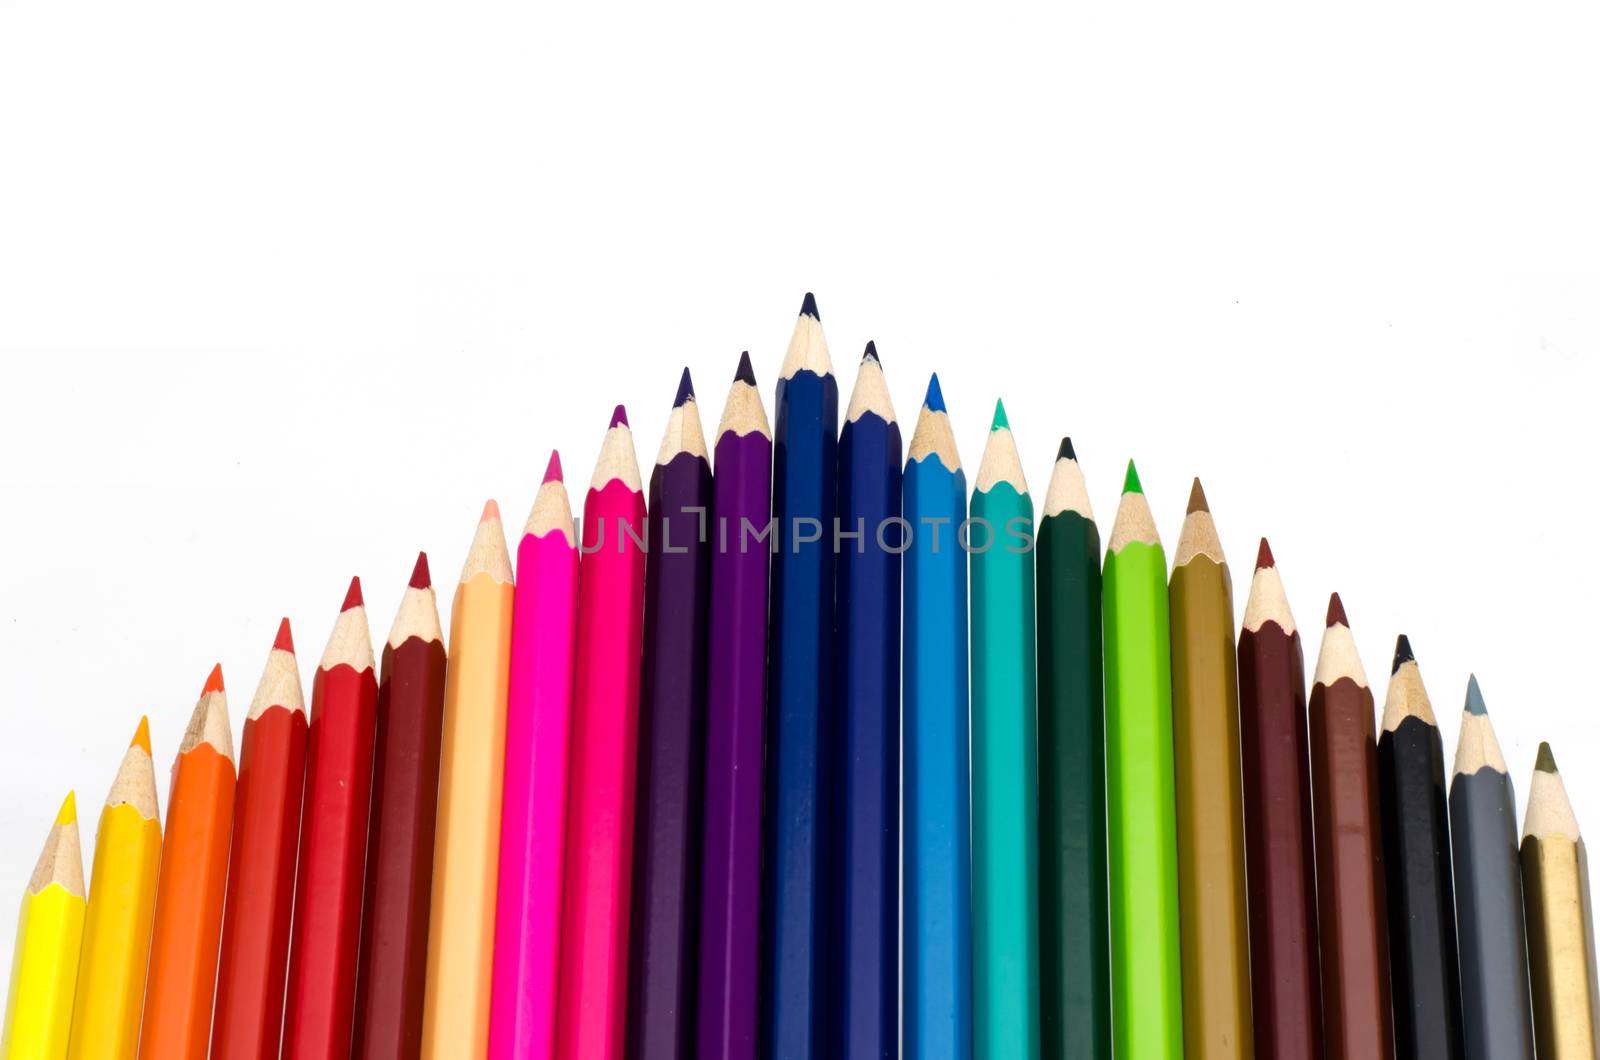 line of colored pencils by photobyphotoboy